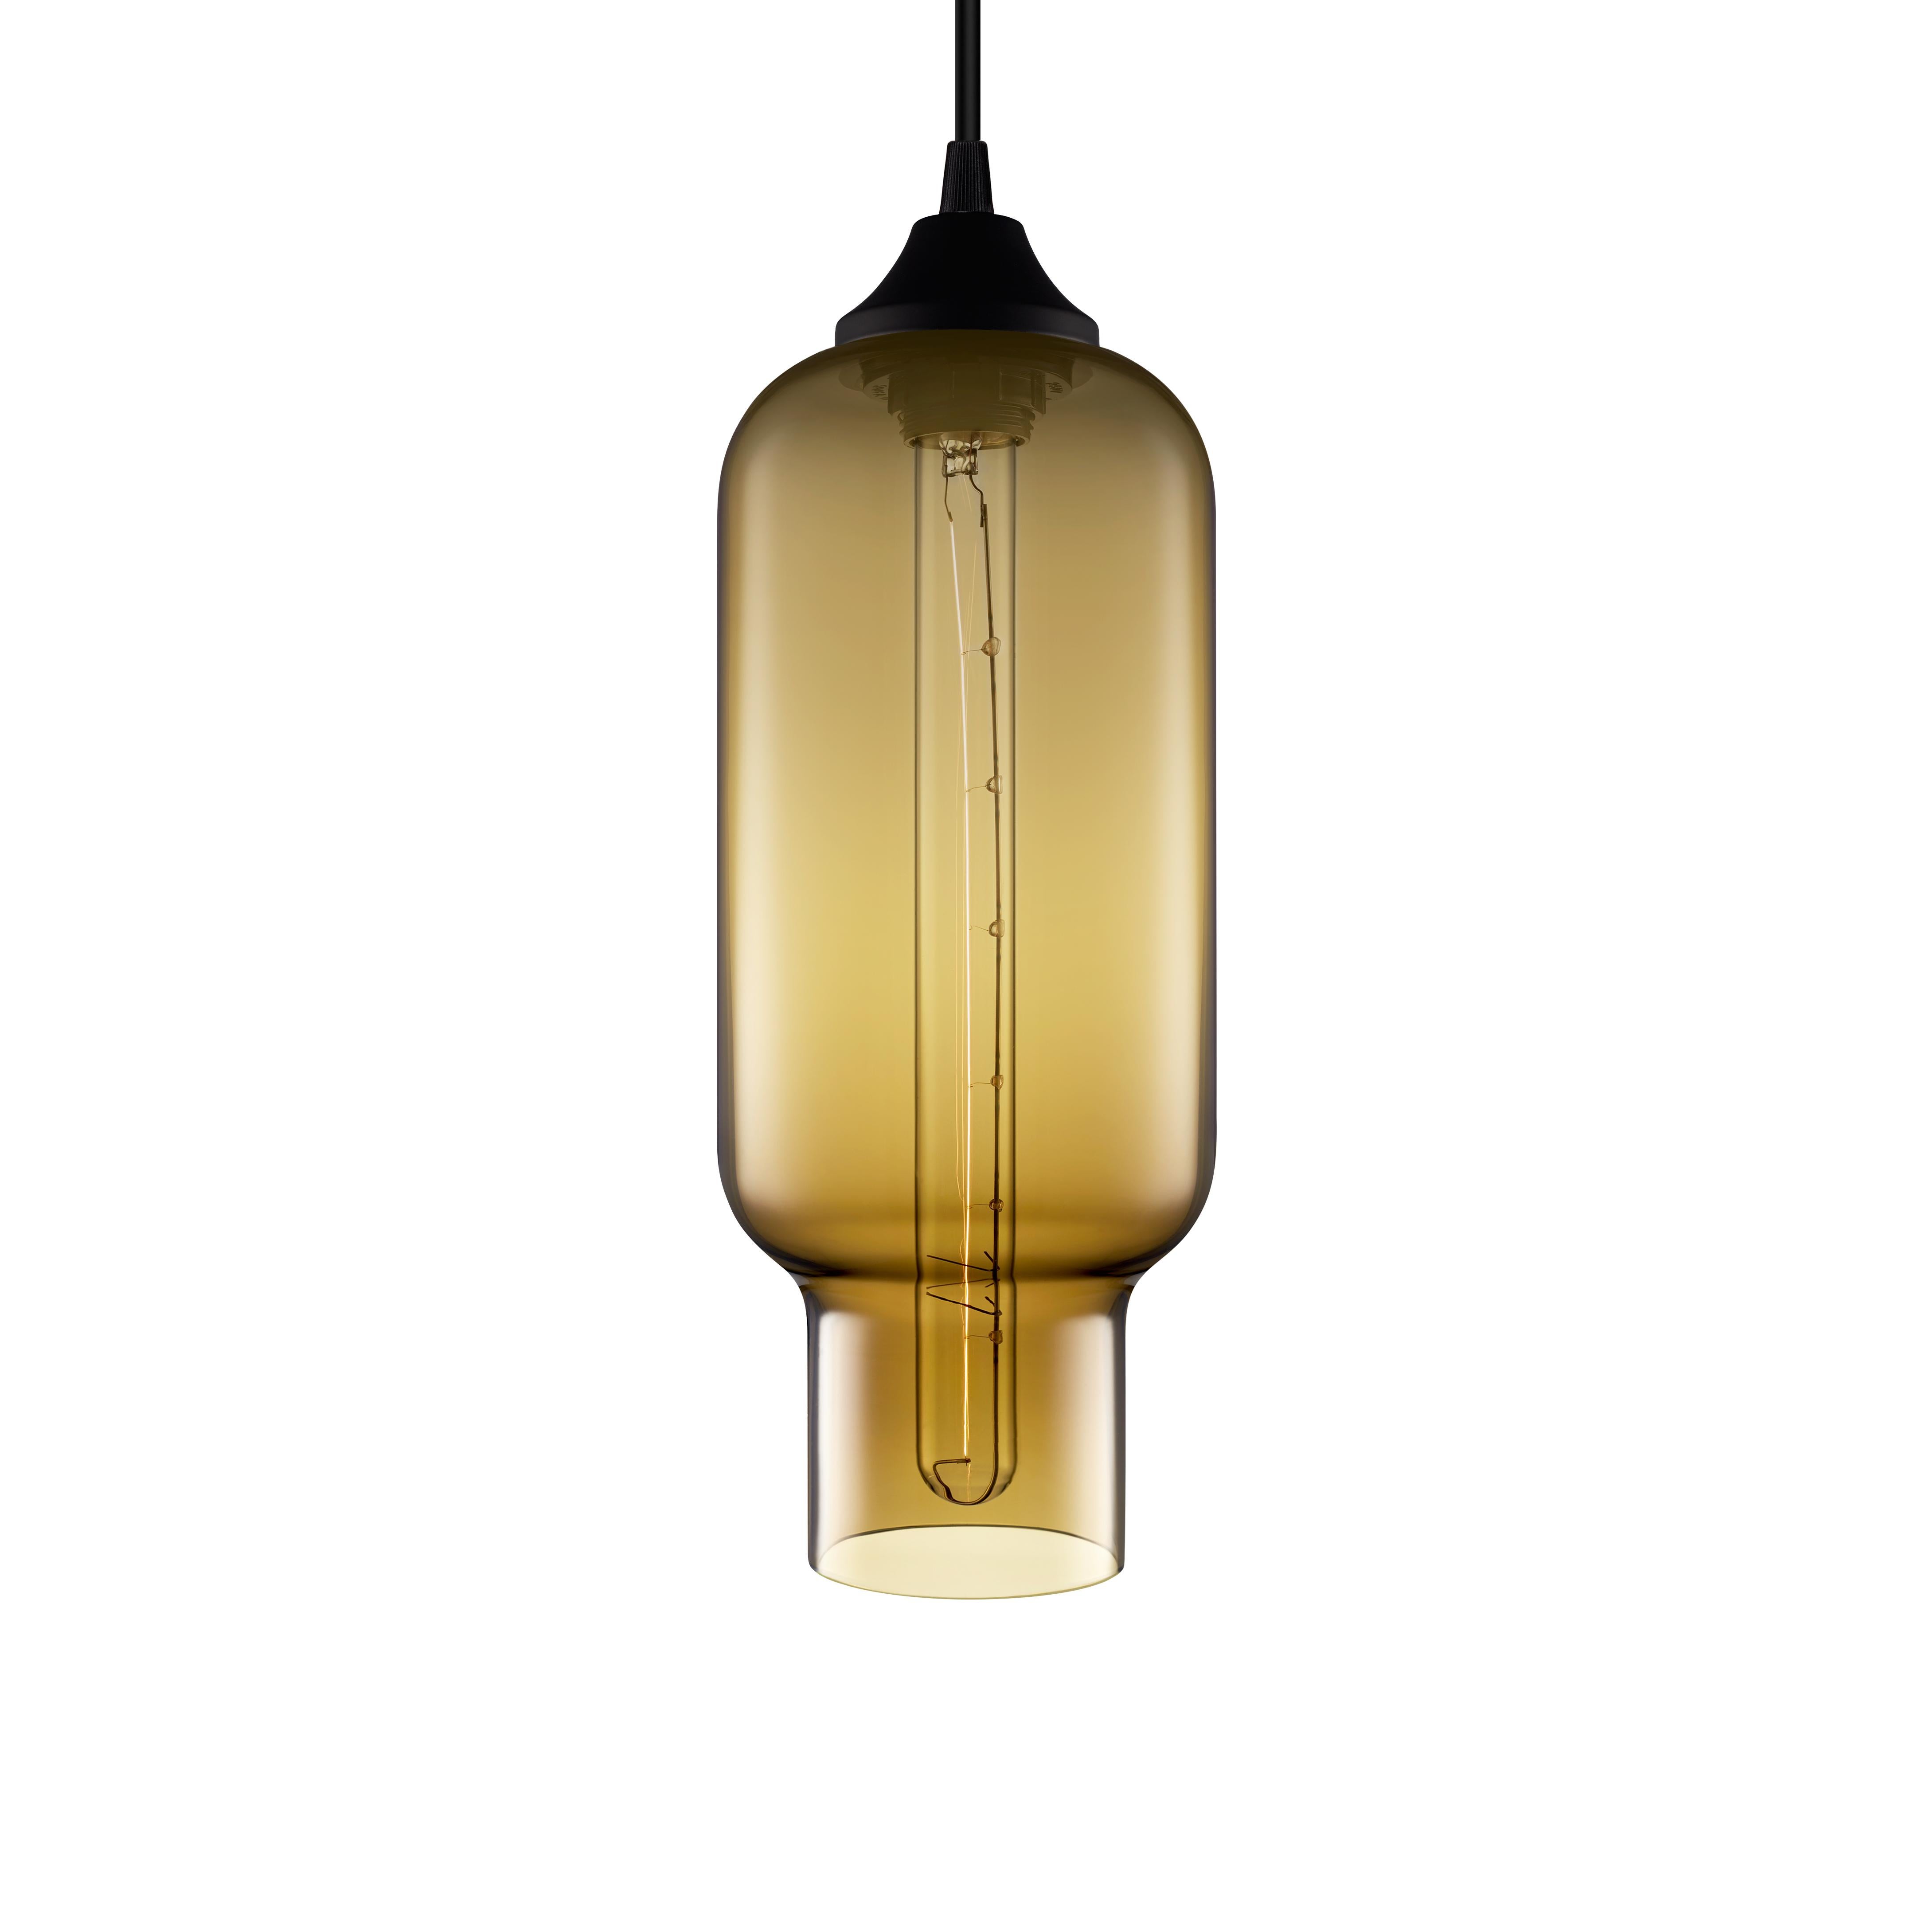 Paying homage to ancient towers of light, the Pharos pendant is sleek enough to stand on its own and simple enough to shine in tightly grouped bouquets. Every single glass pendant light that comes from Niche is handblown by real human beings in a